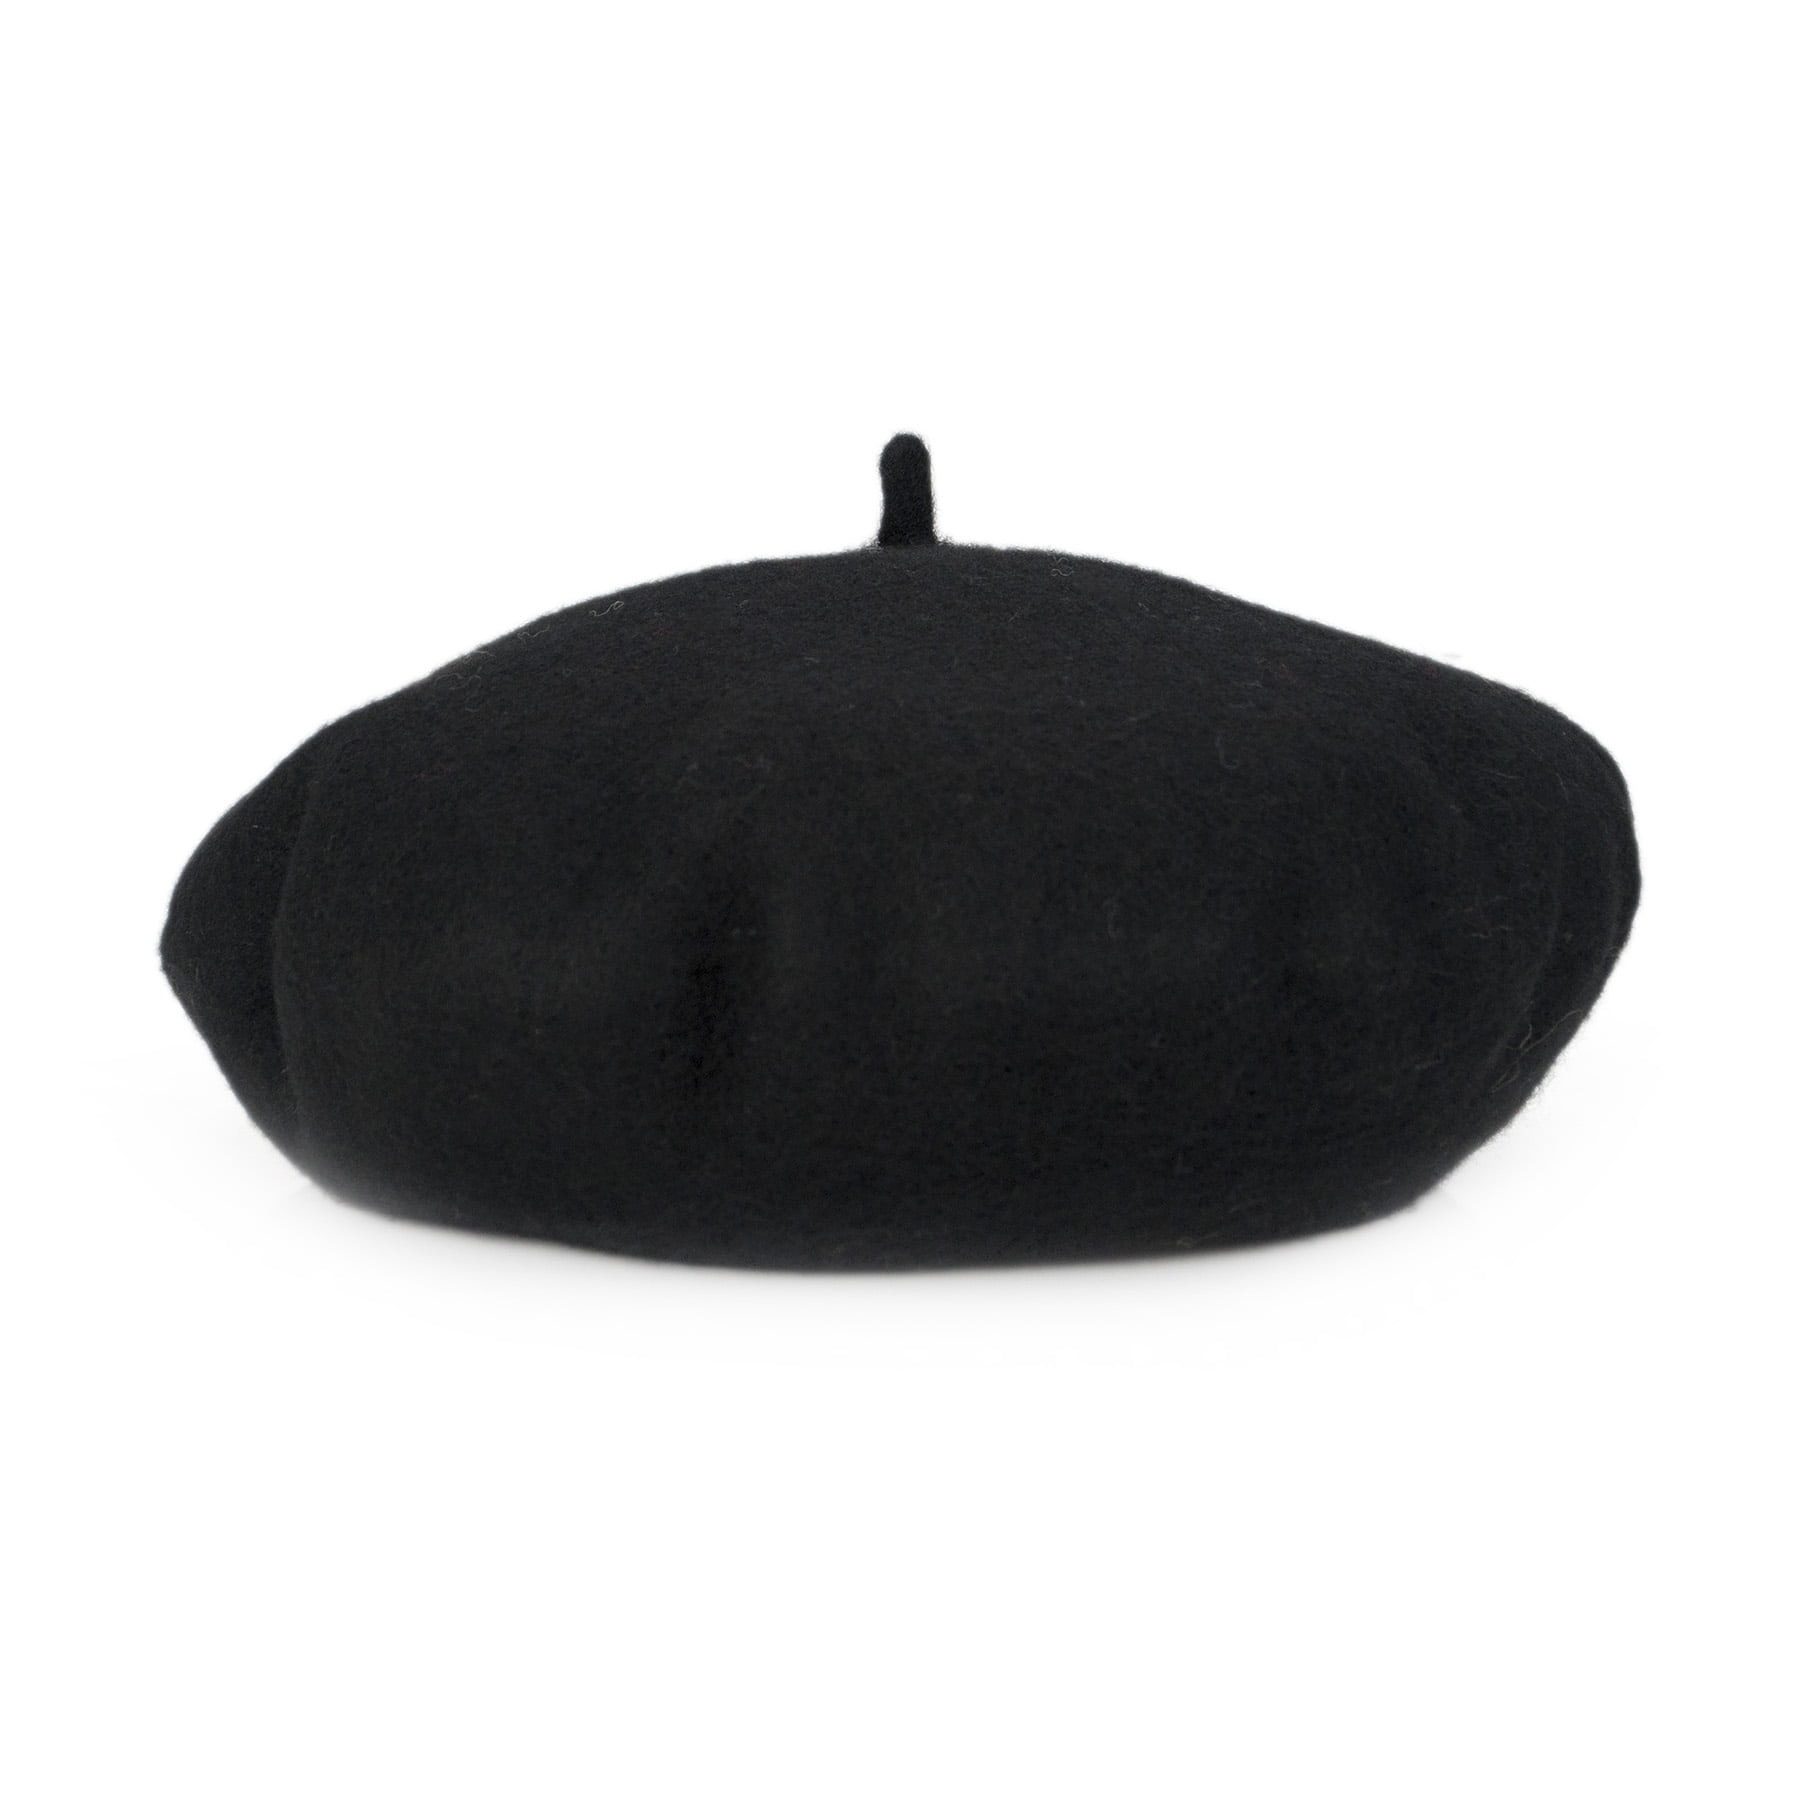 Opromo Wool French Beret Women Ladies Art Basque Hat, 11 inches in ...